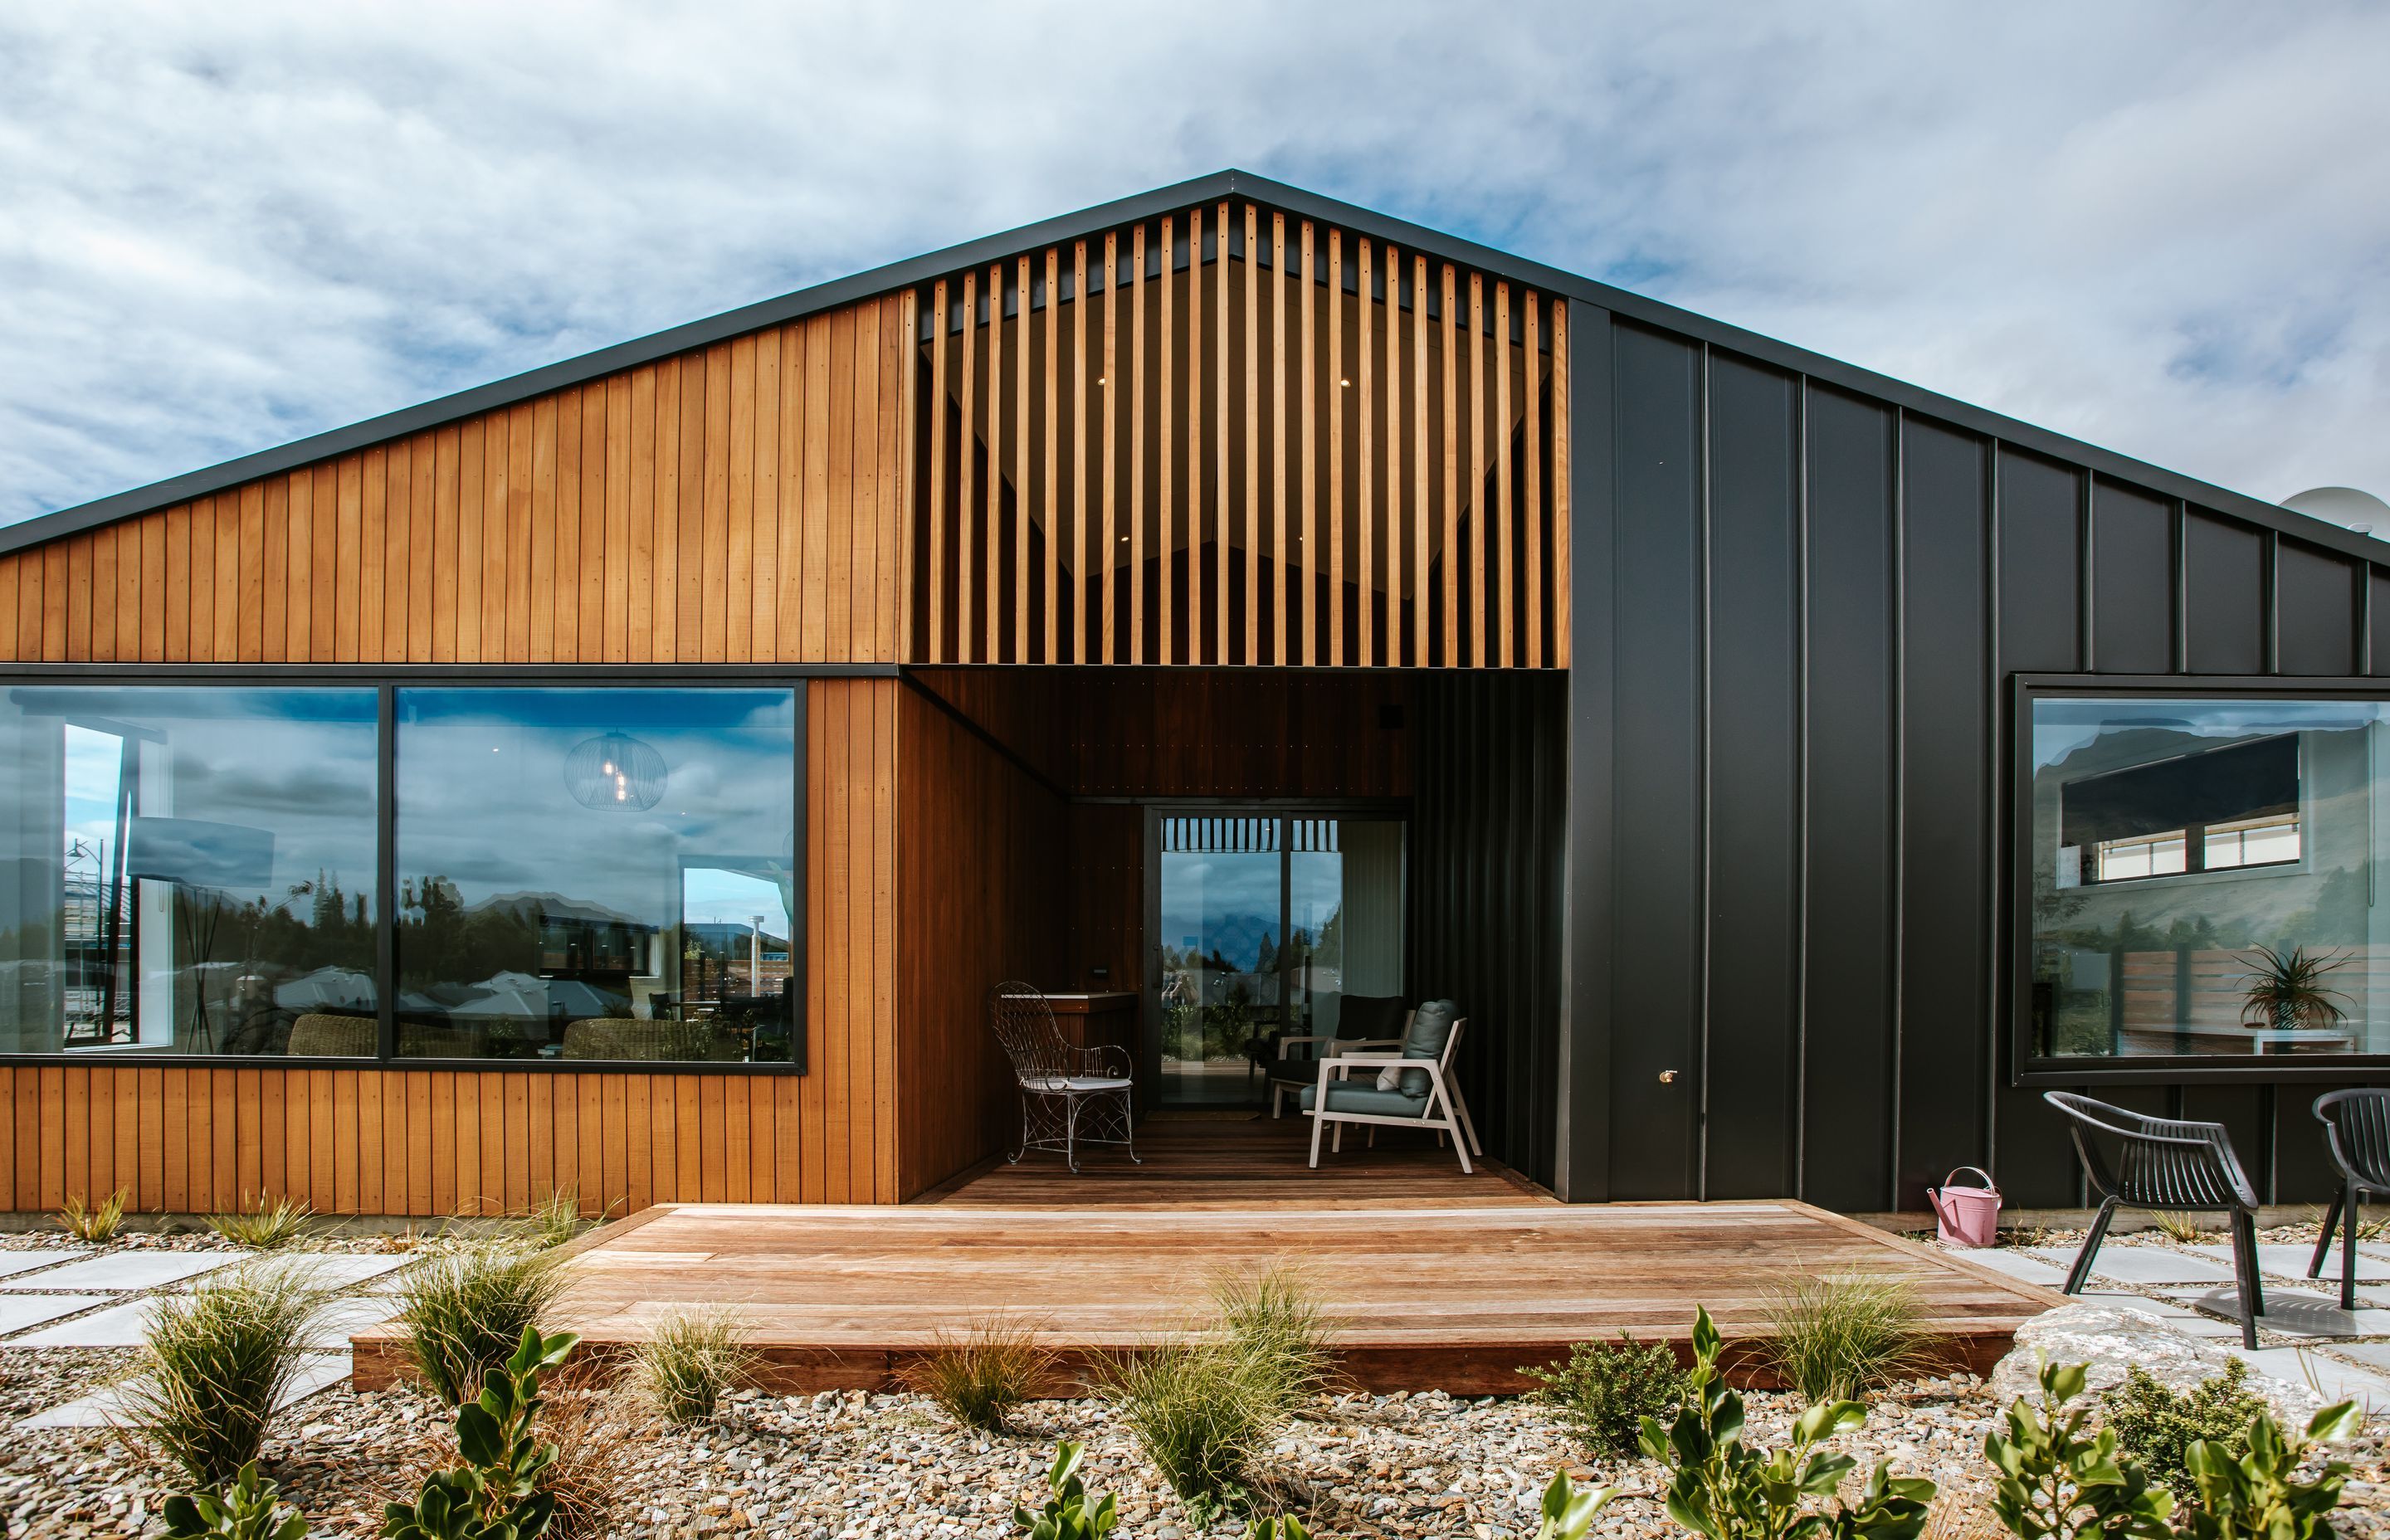 The back of the home juxtaposes dark tray cladding against warm timber cladding.